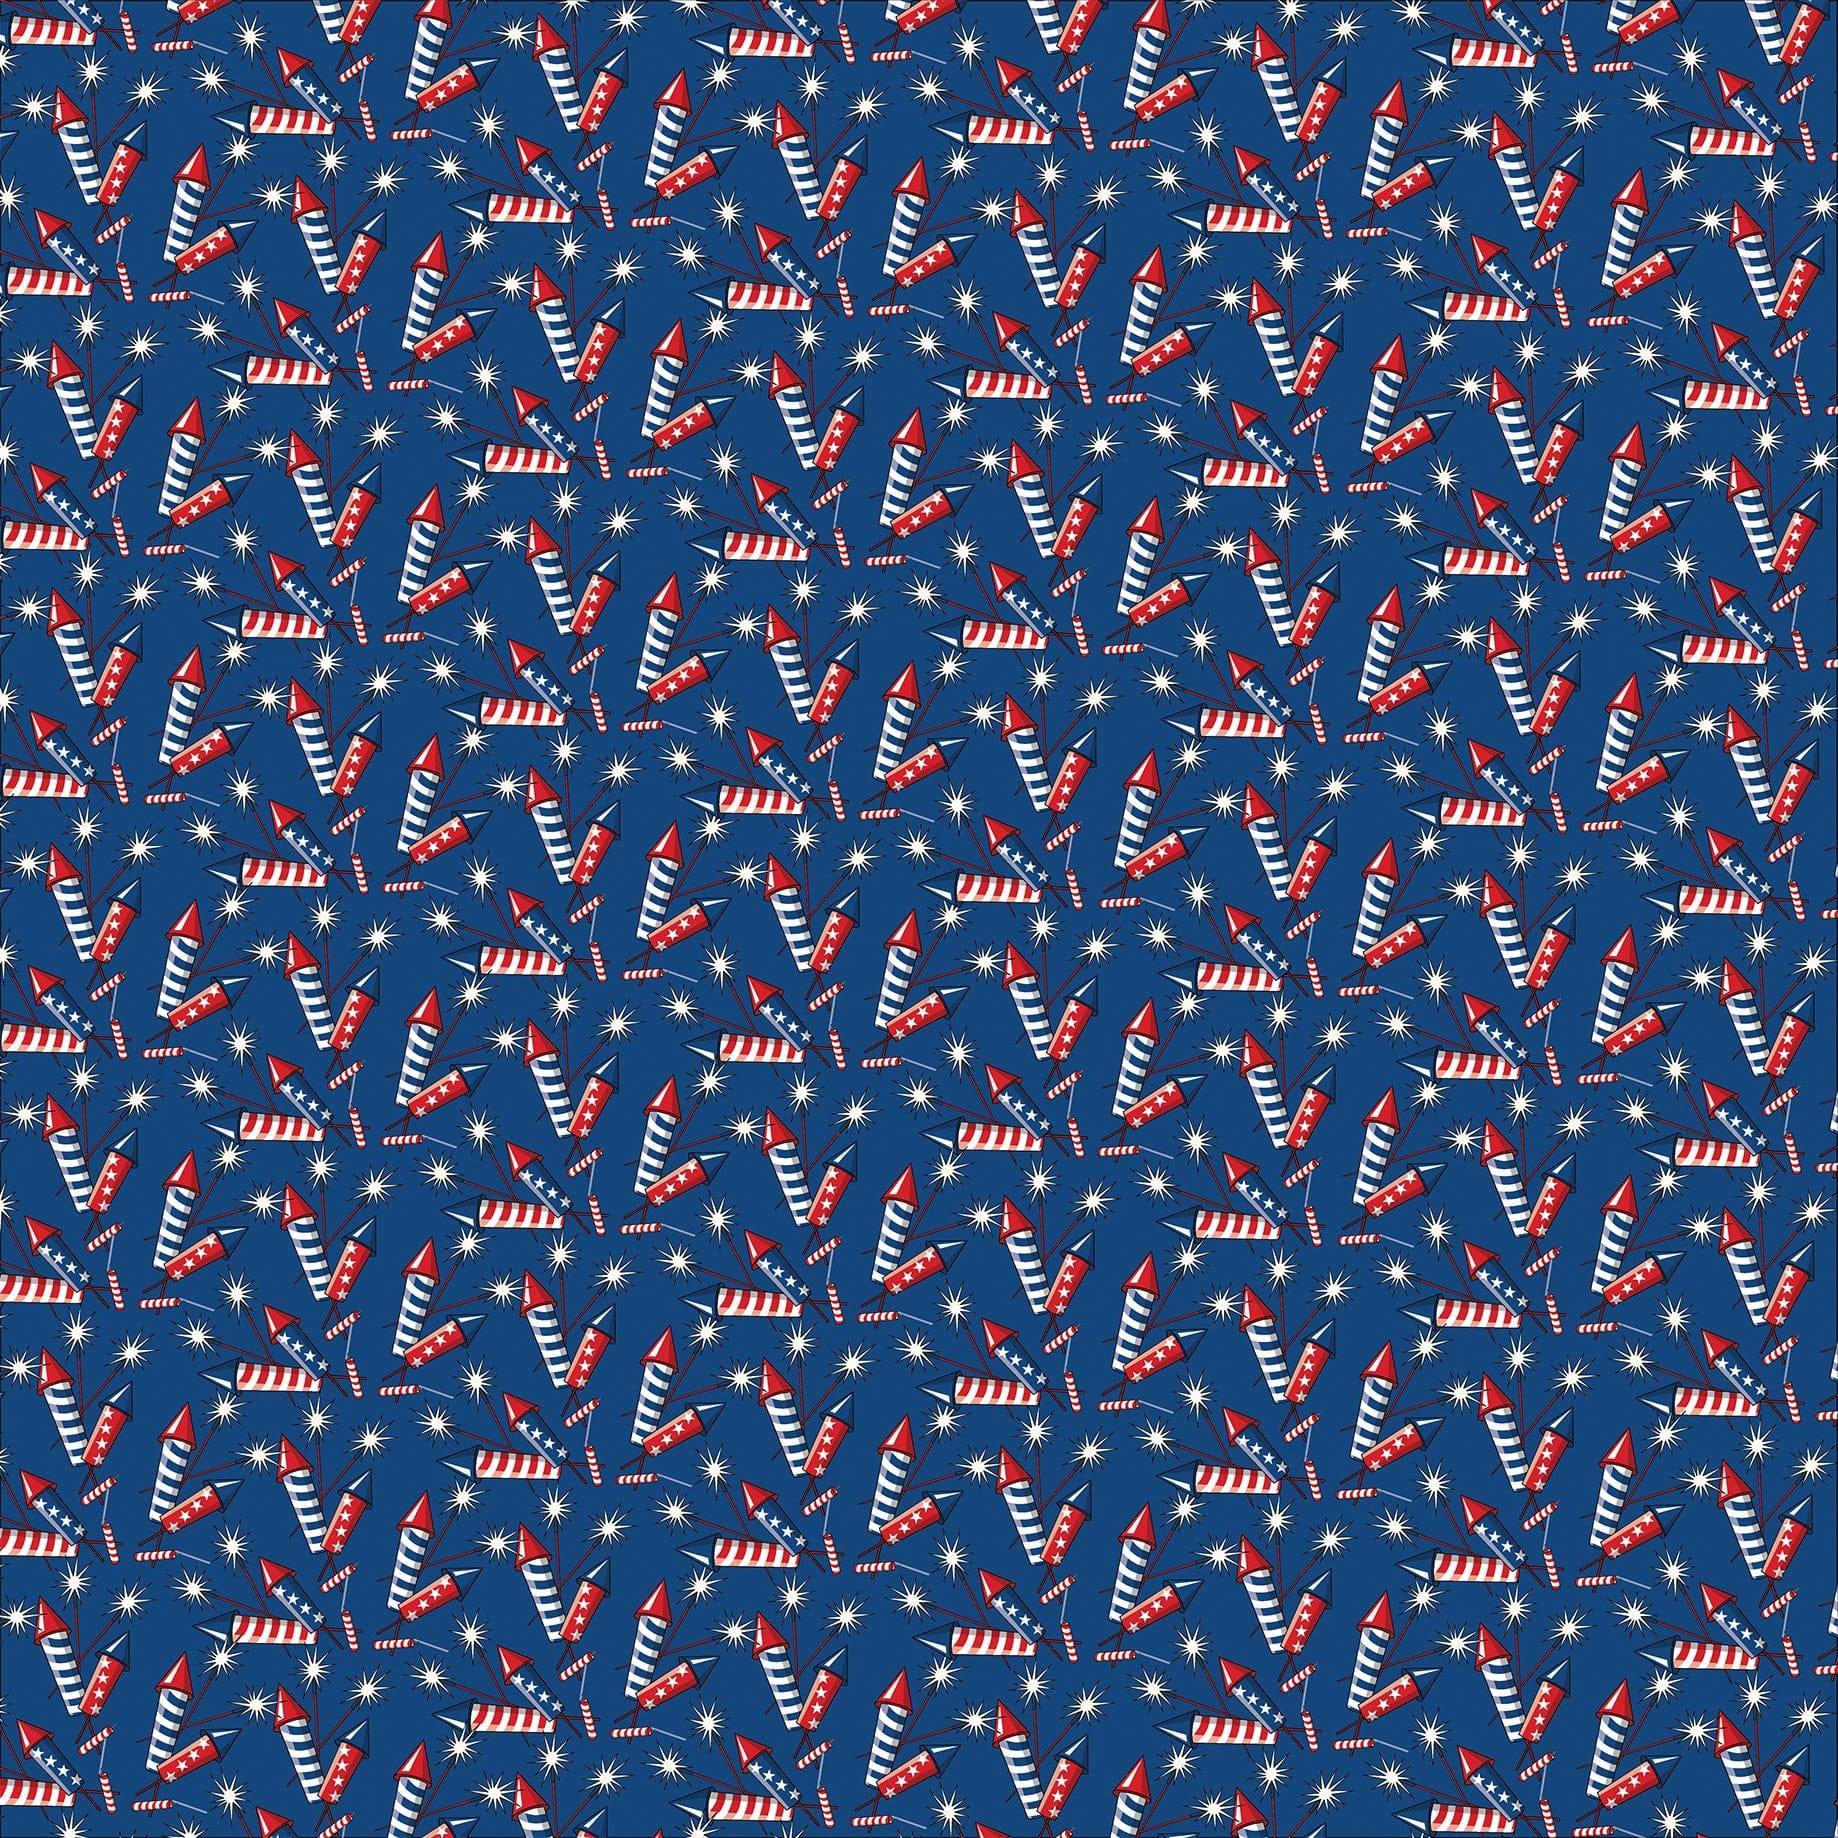 God Bless America Collection Firecracker Fun 12 x 12 Double-Sided Scrapbook Paper by Carta Bella - Scrapbook Supply Companies